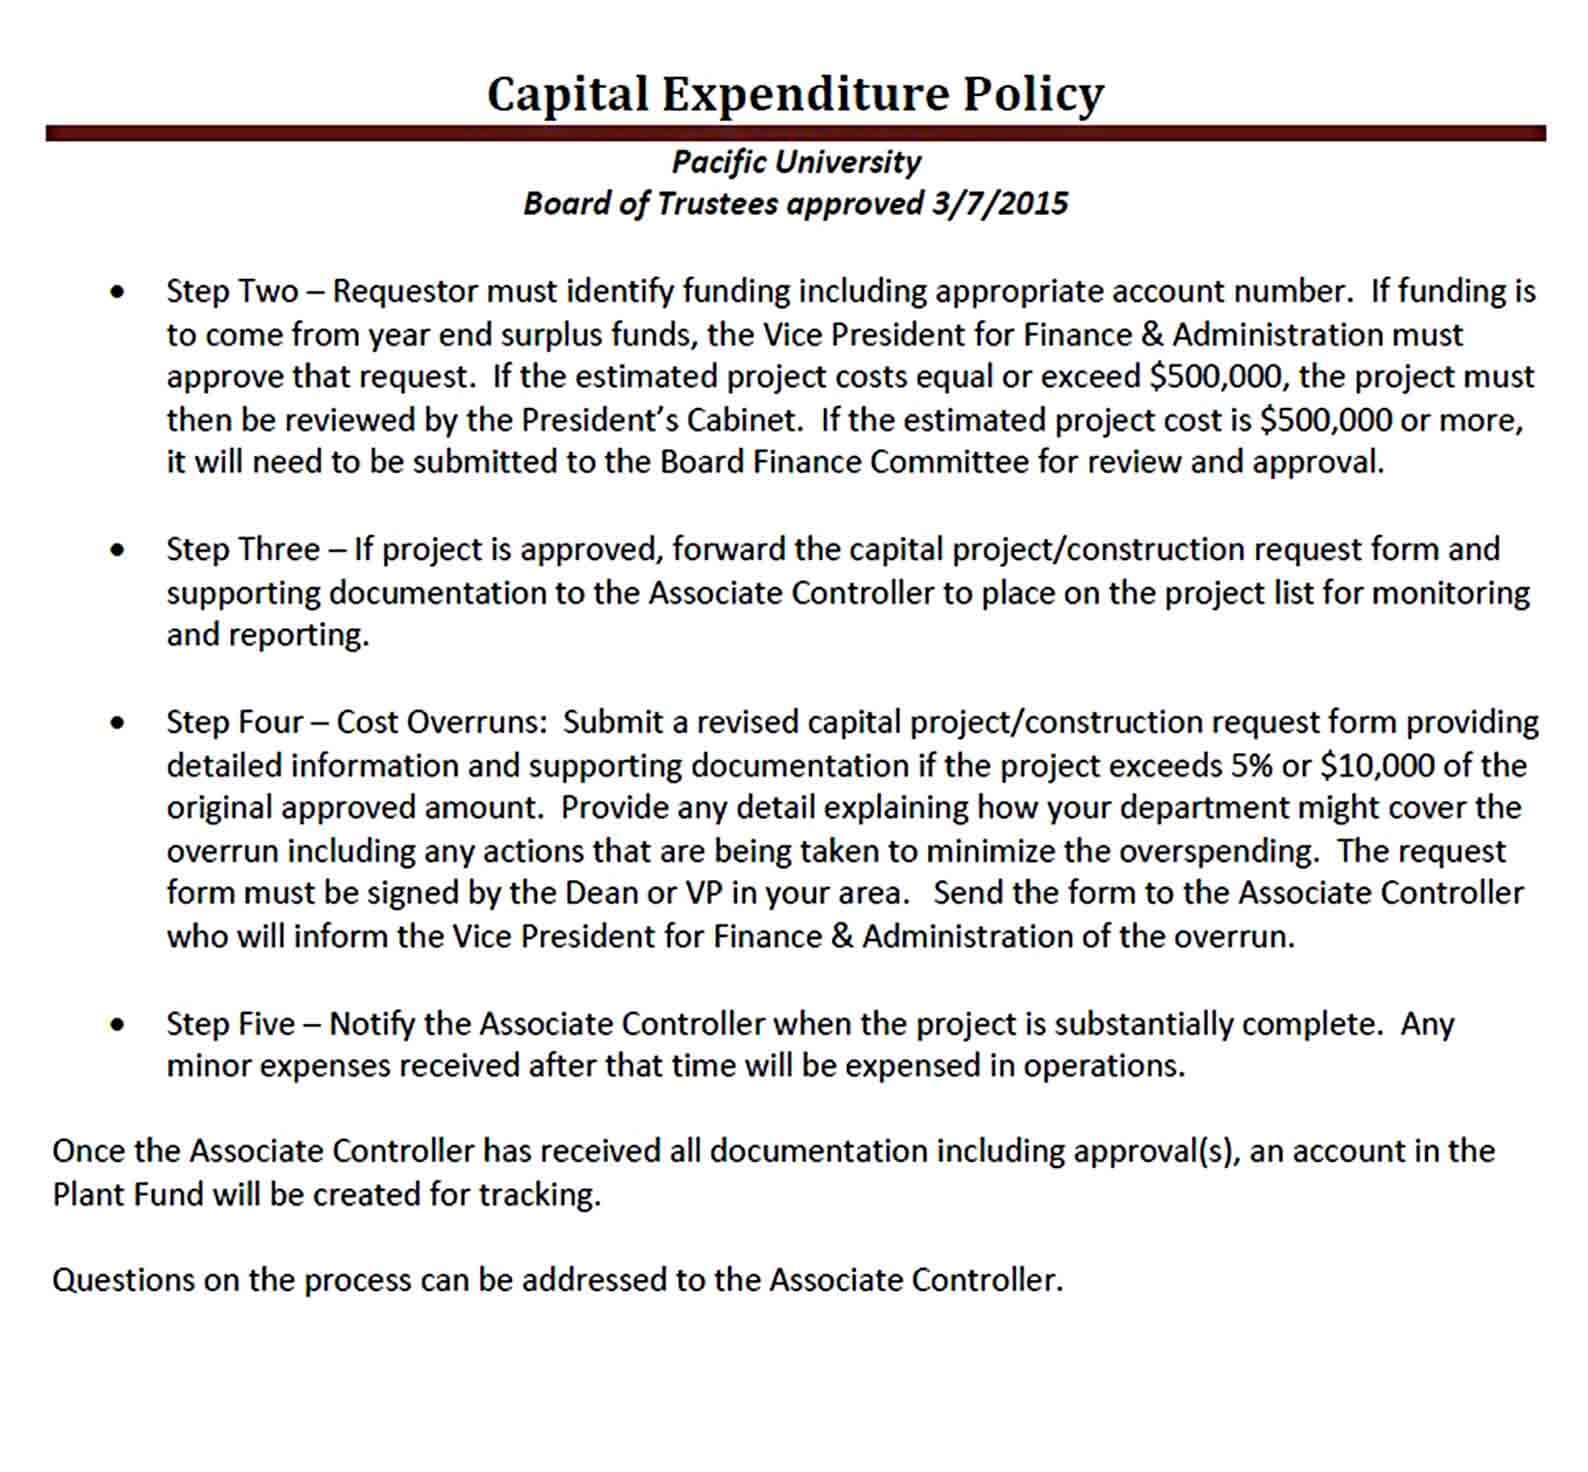 Sample Capital Expenditure Budget Policy PDF Download